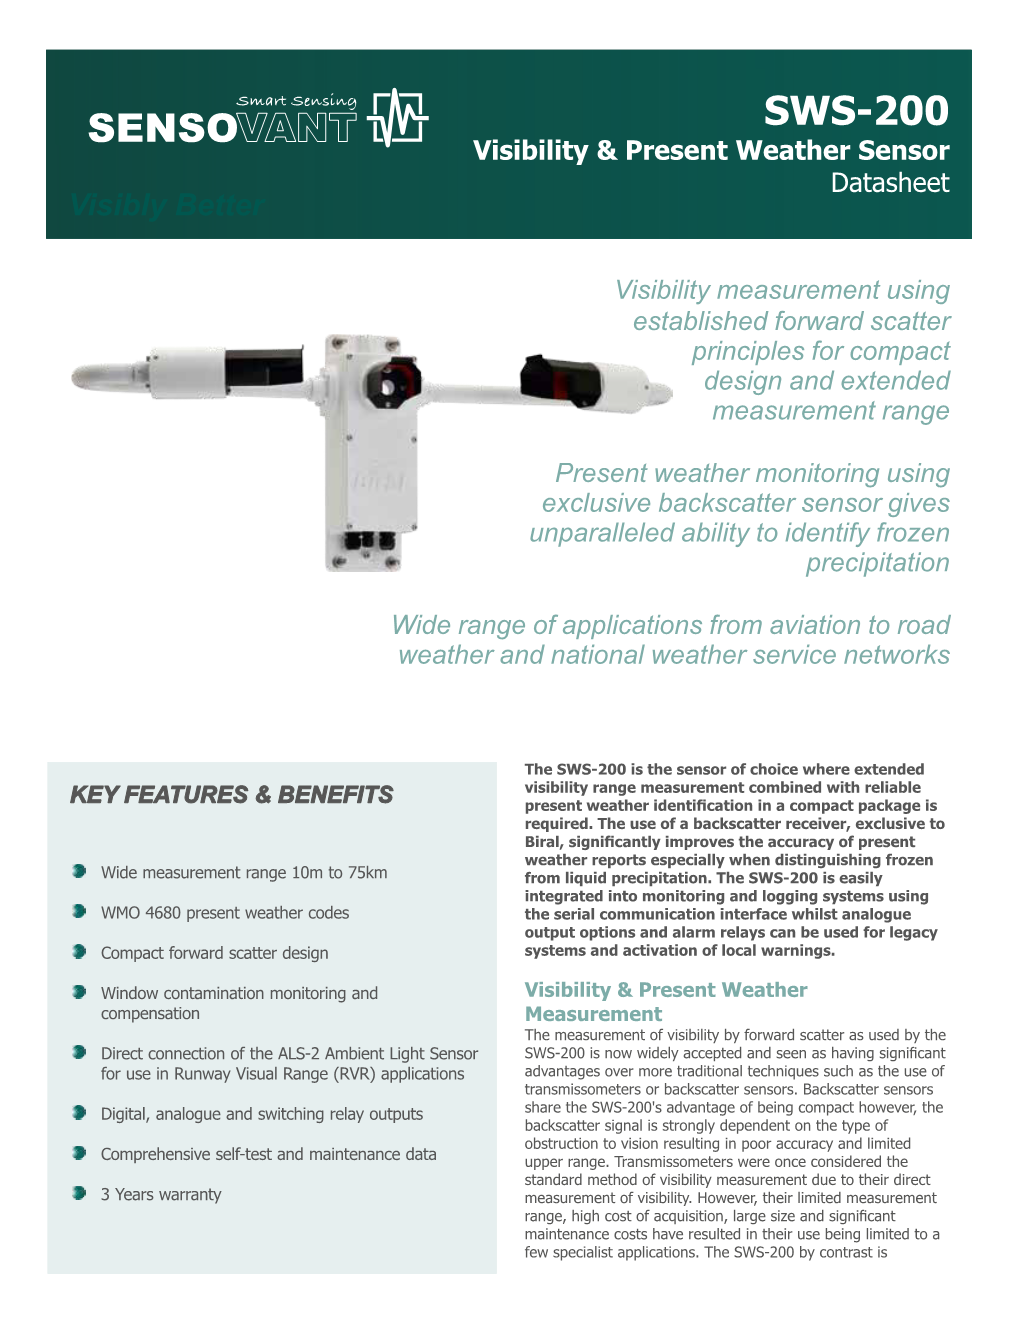 SWS-200 Visibility & Present Weather Sensor Datasheet Visibly Better